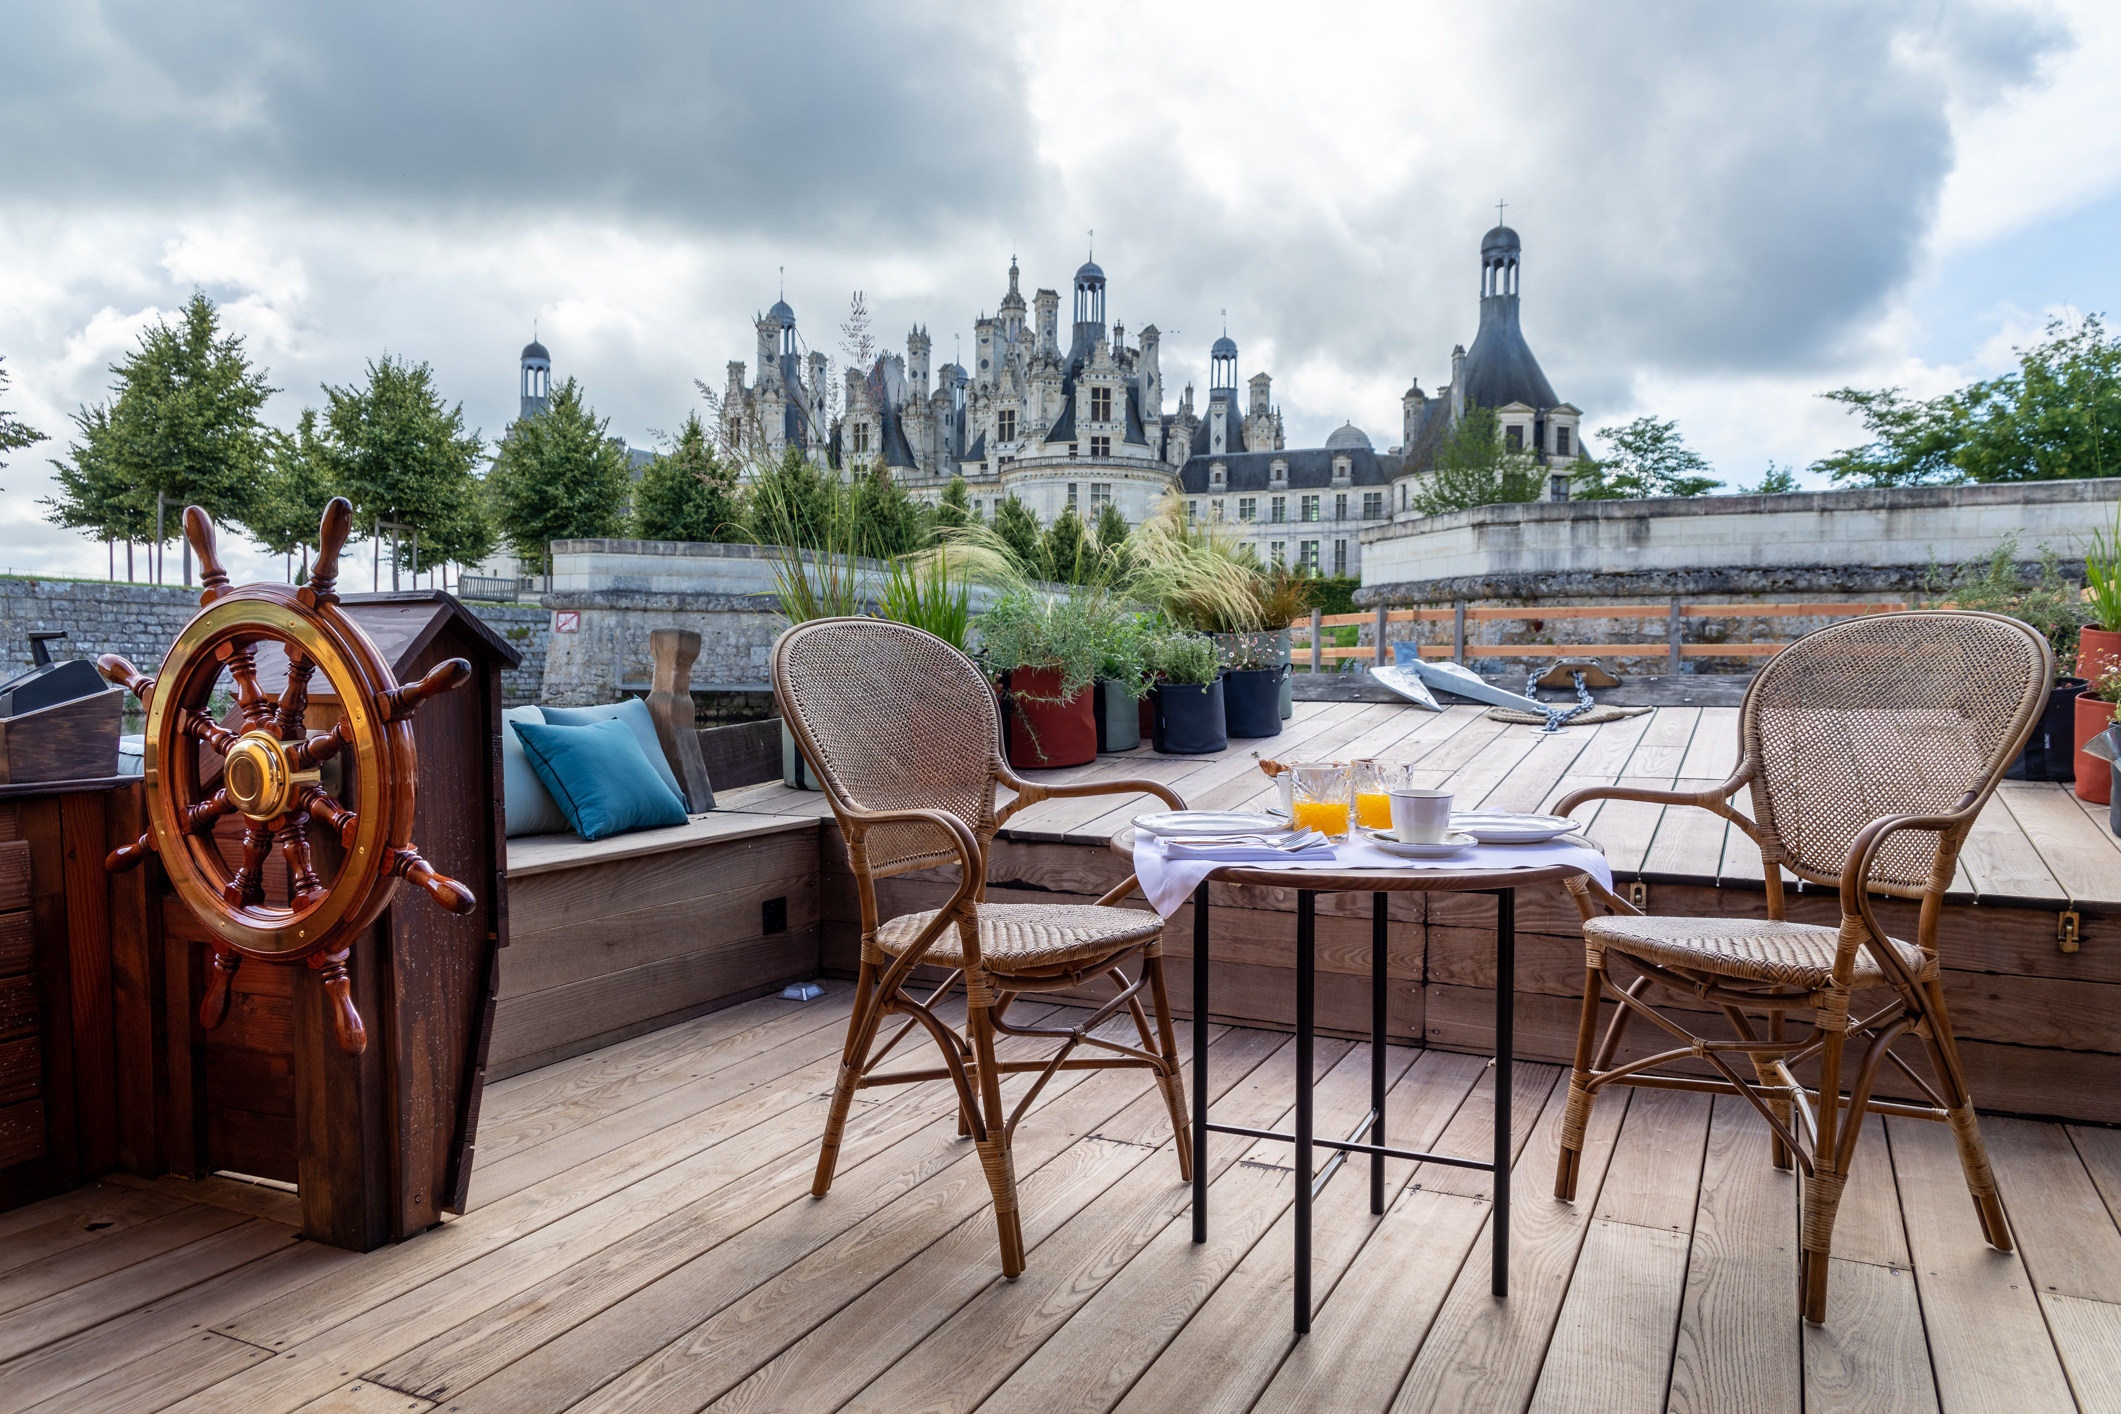 France’s bucolic Loire Valley is more likely to be chosen as a holiday destination by European visitors than a crowded St Tropez beach. Photo: Chateau of Chambord